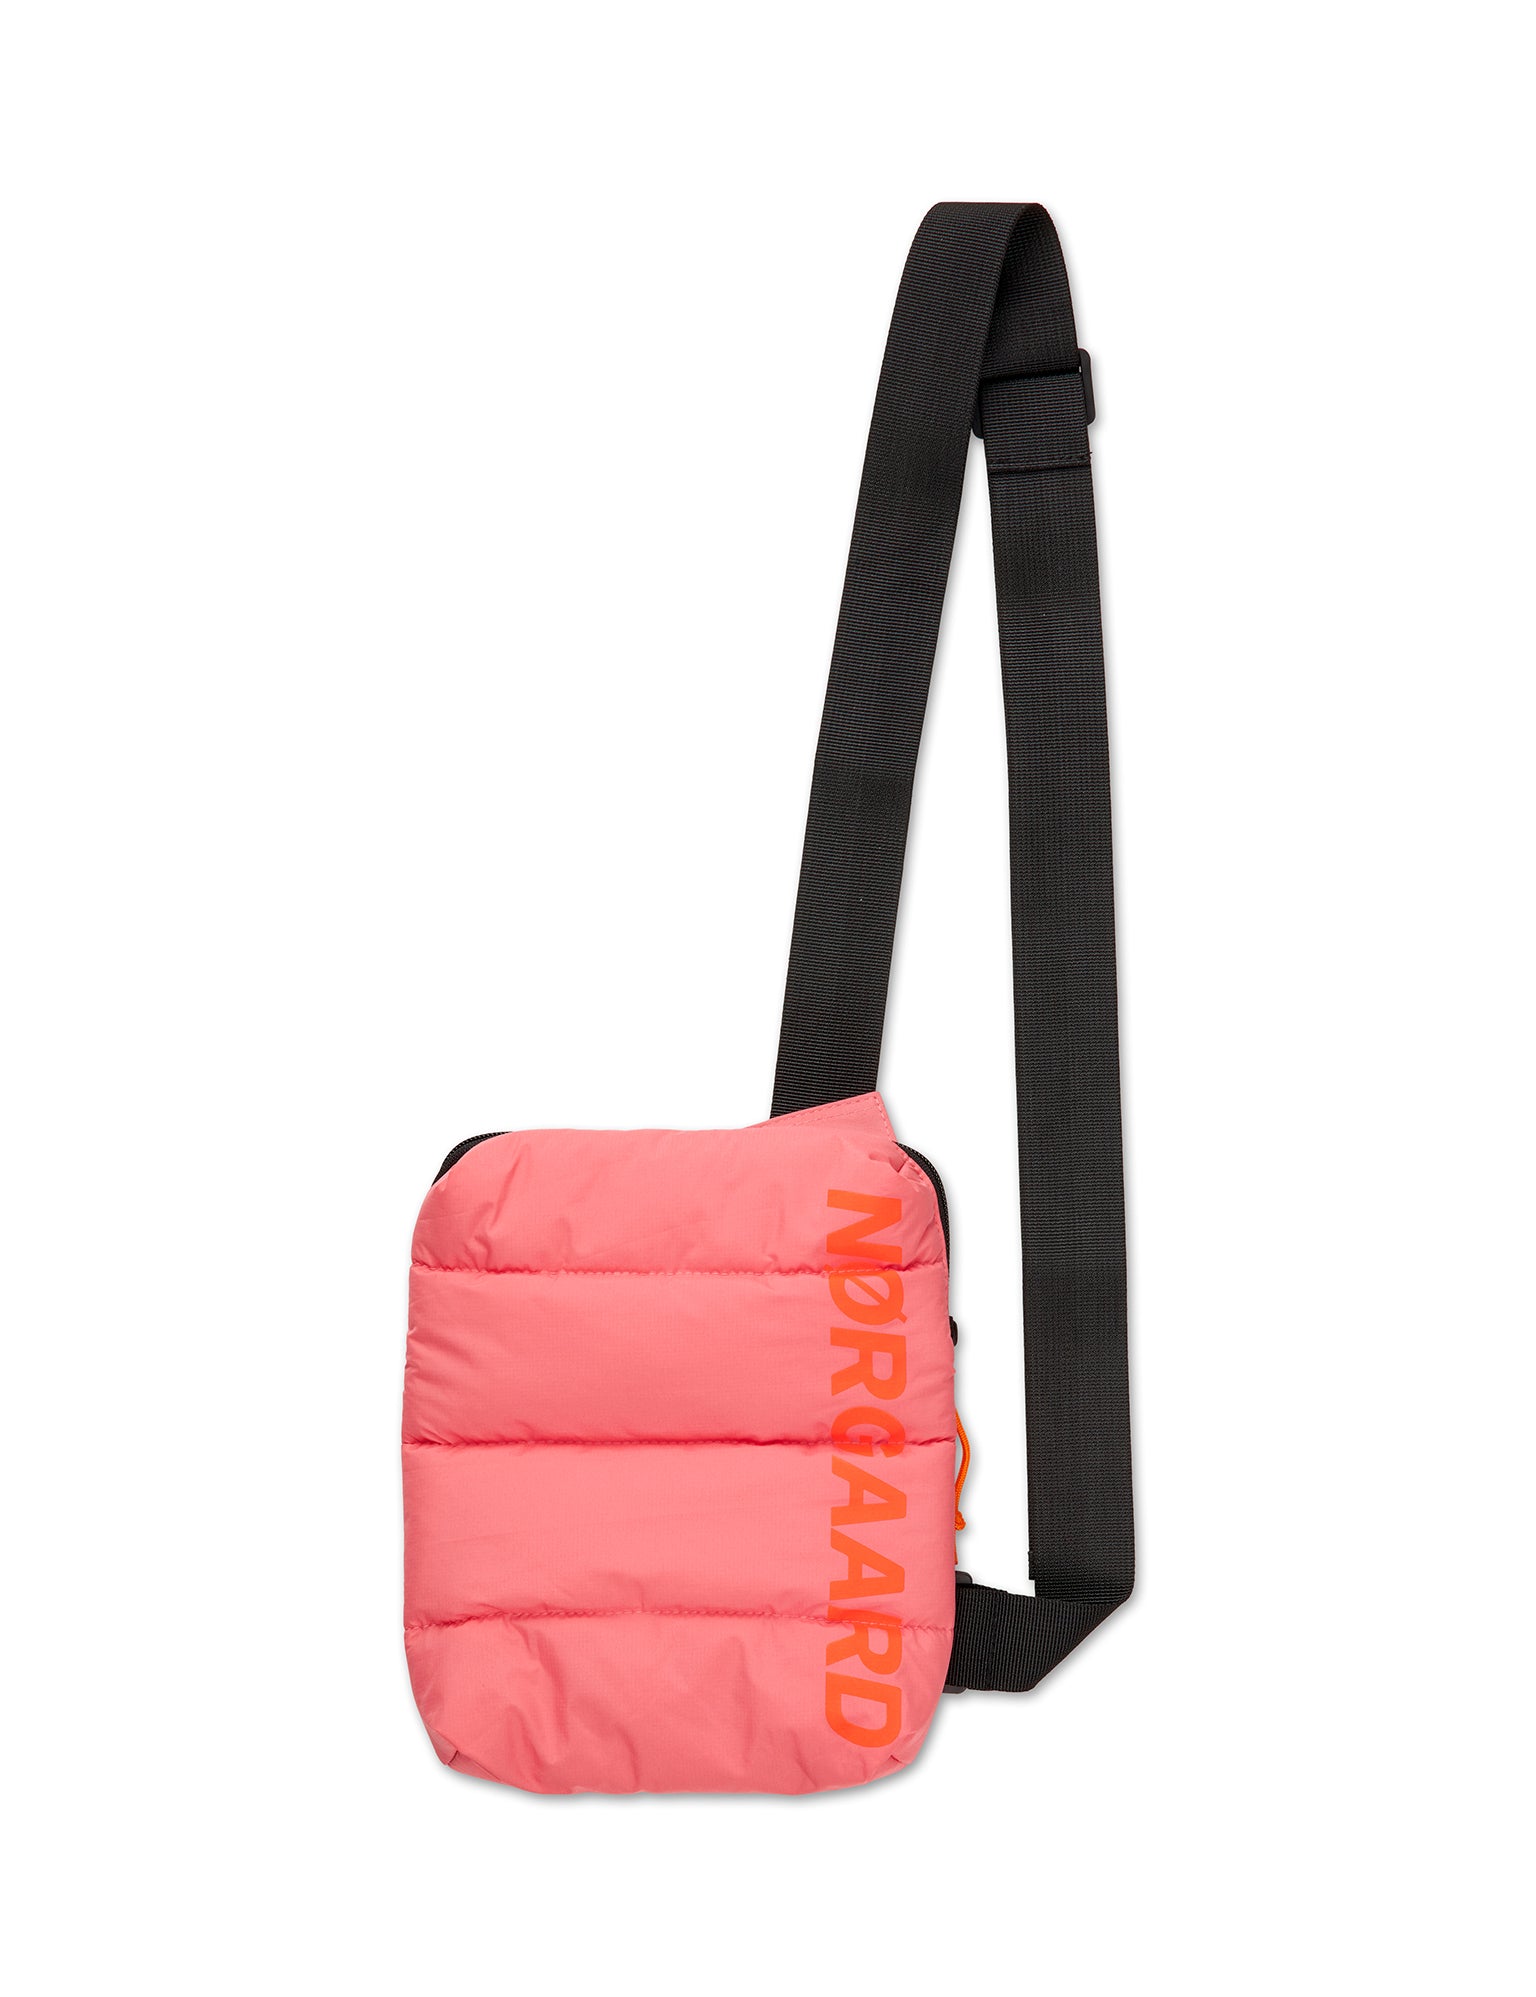 Mads Norgaard Recycle Fendor Crossbody Bag - Shell Pink